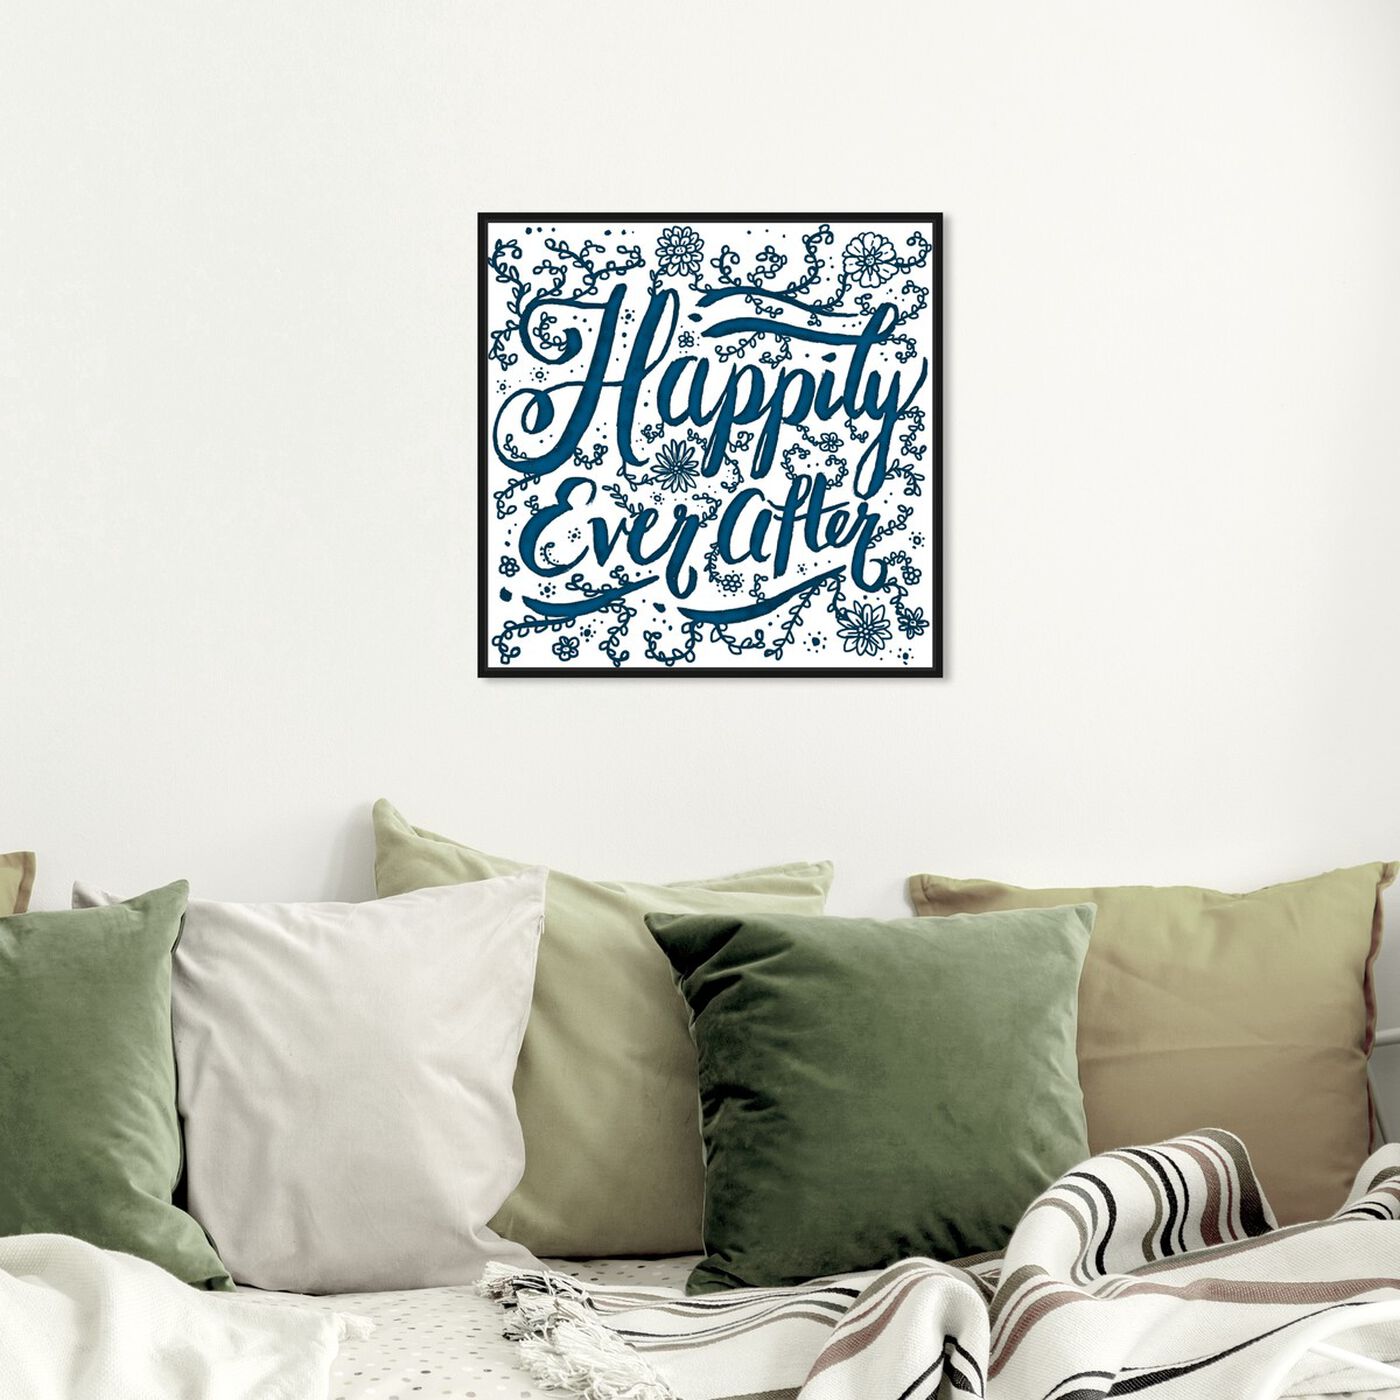 Hanging view of Happily Ever After featuring typography and quotes and family quotes and sayings art.